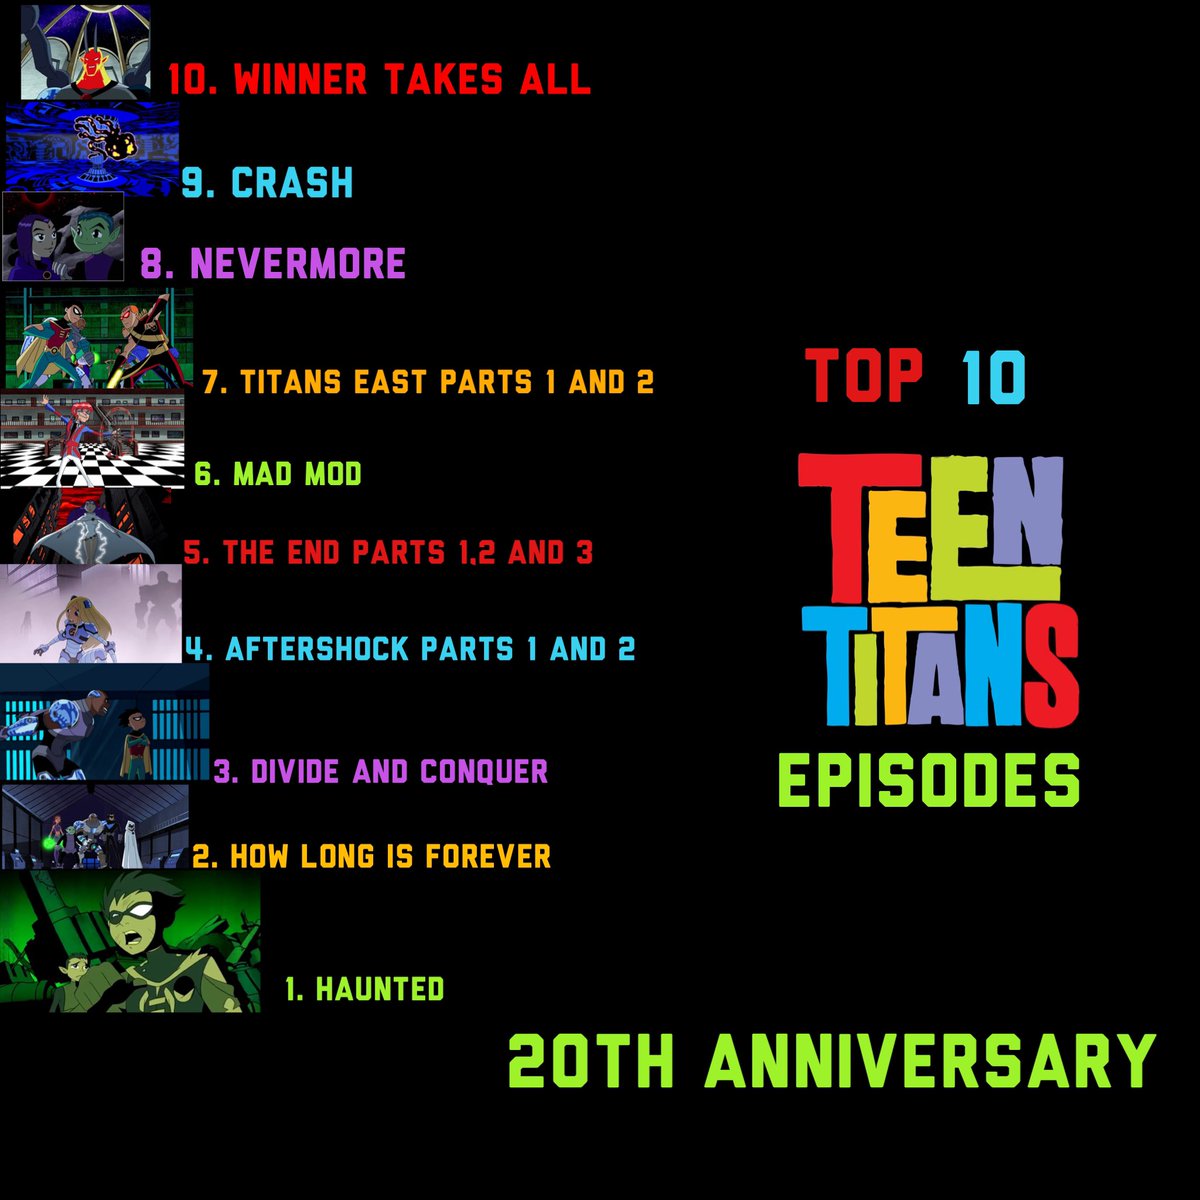 It’s the 20th anniversary of teen titans and here are my #Top10 #teentitans #teentitans20thanniversary #titansgo #20yearsago